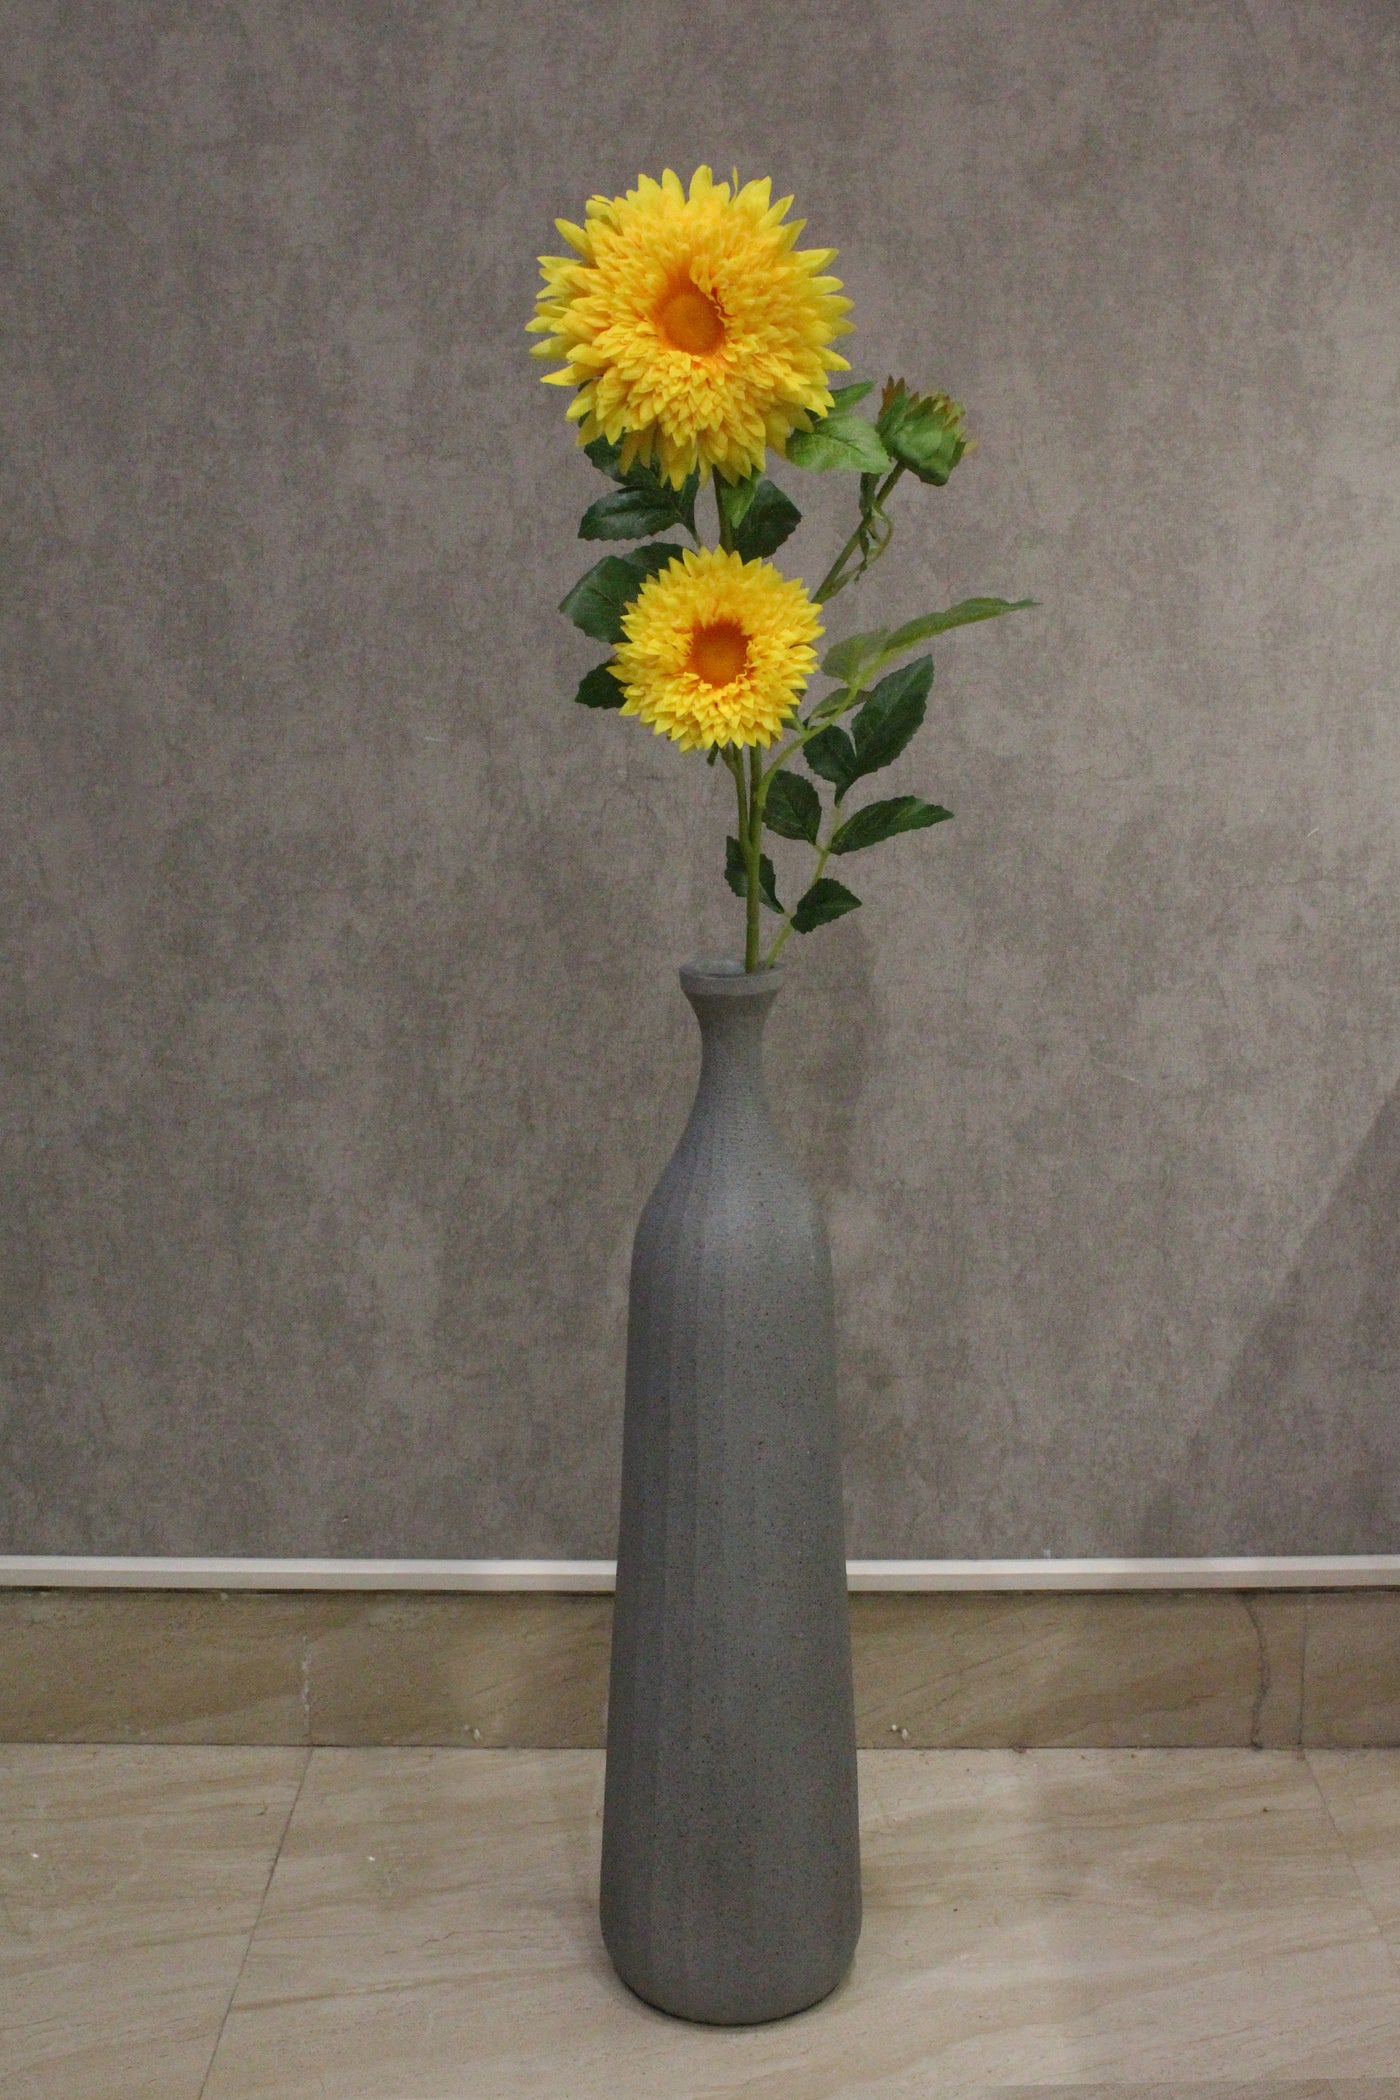 Artificial real touch Dahlia Beautiful Flower for your Home or Office Decor